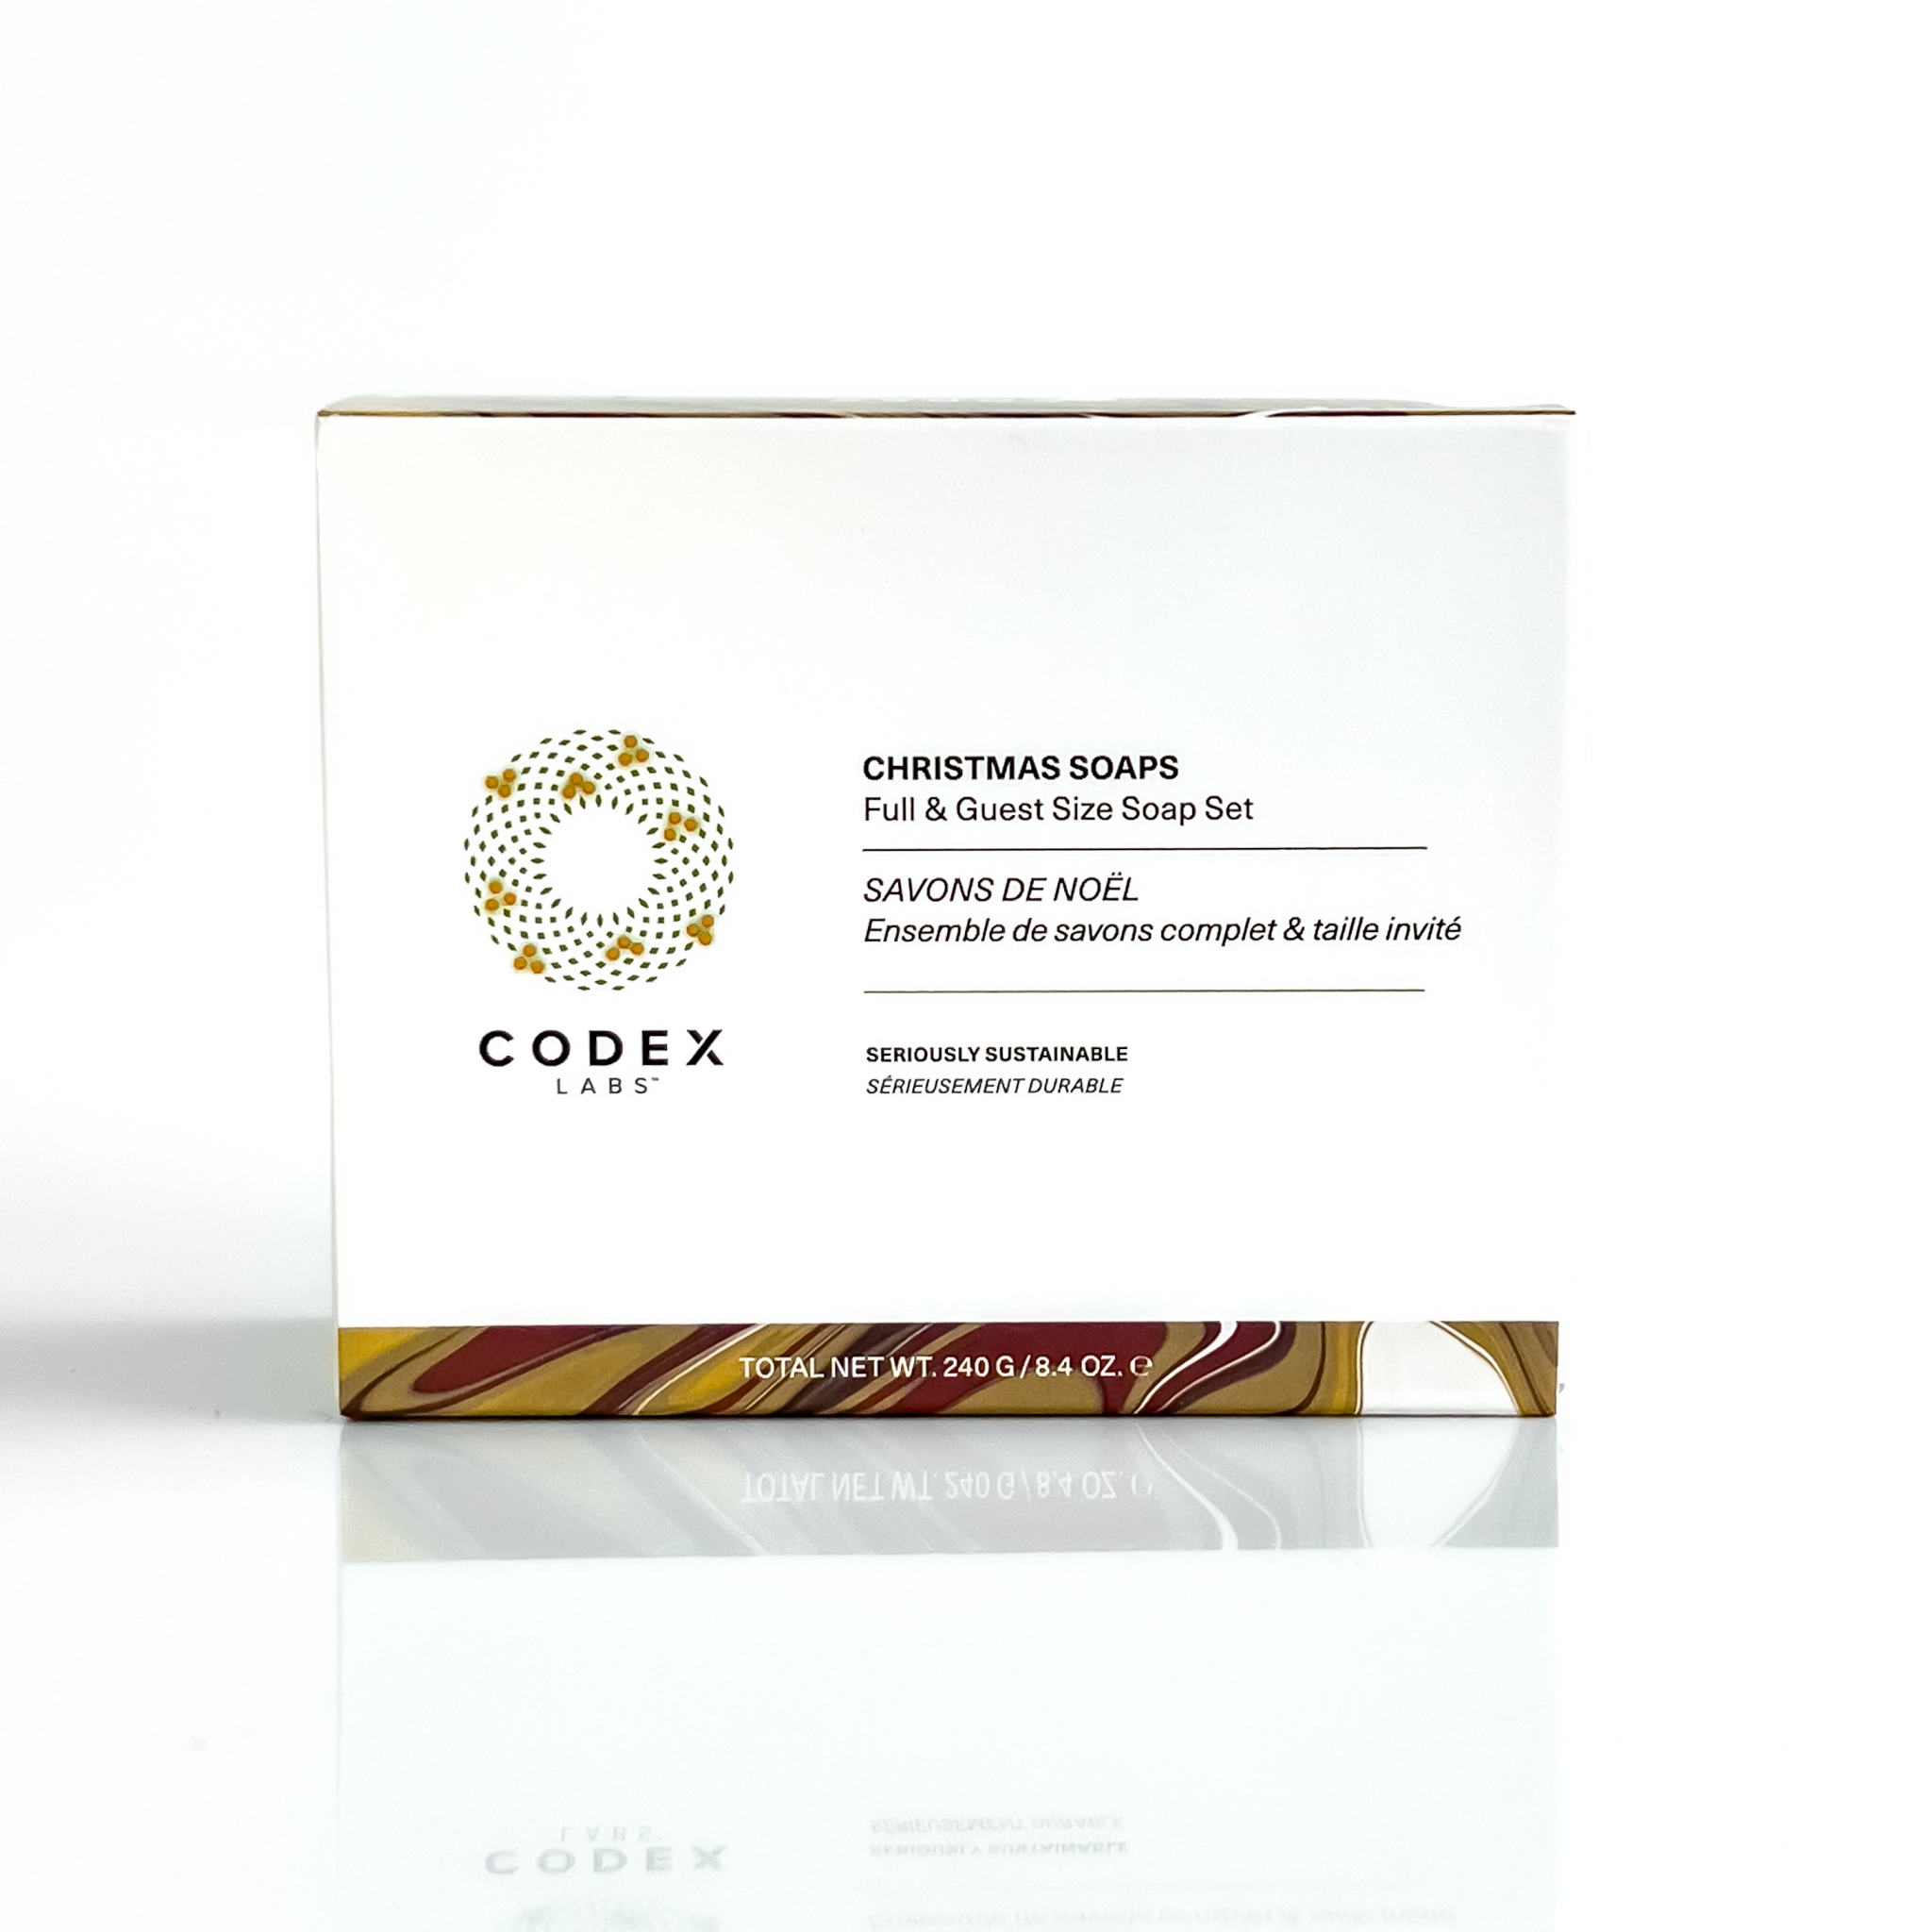 Codex Labs Christmas soap set front of box on a white background.